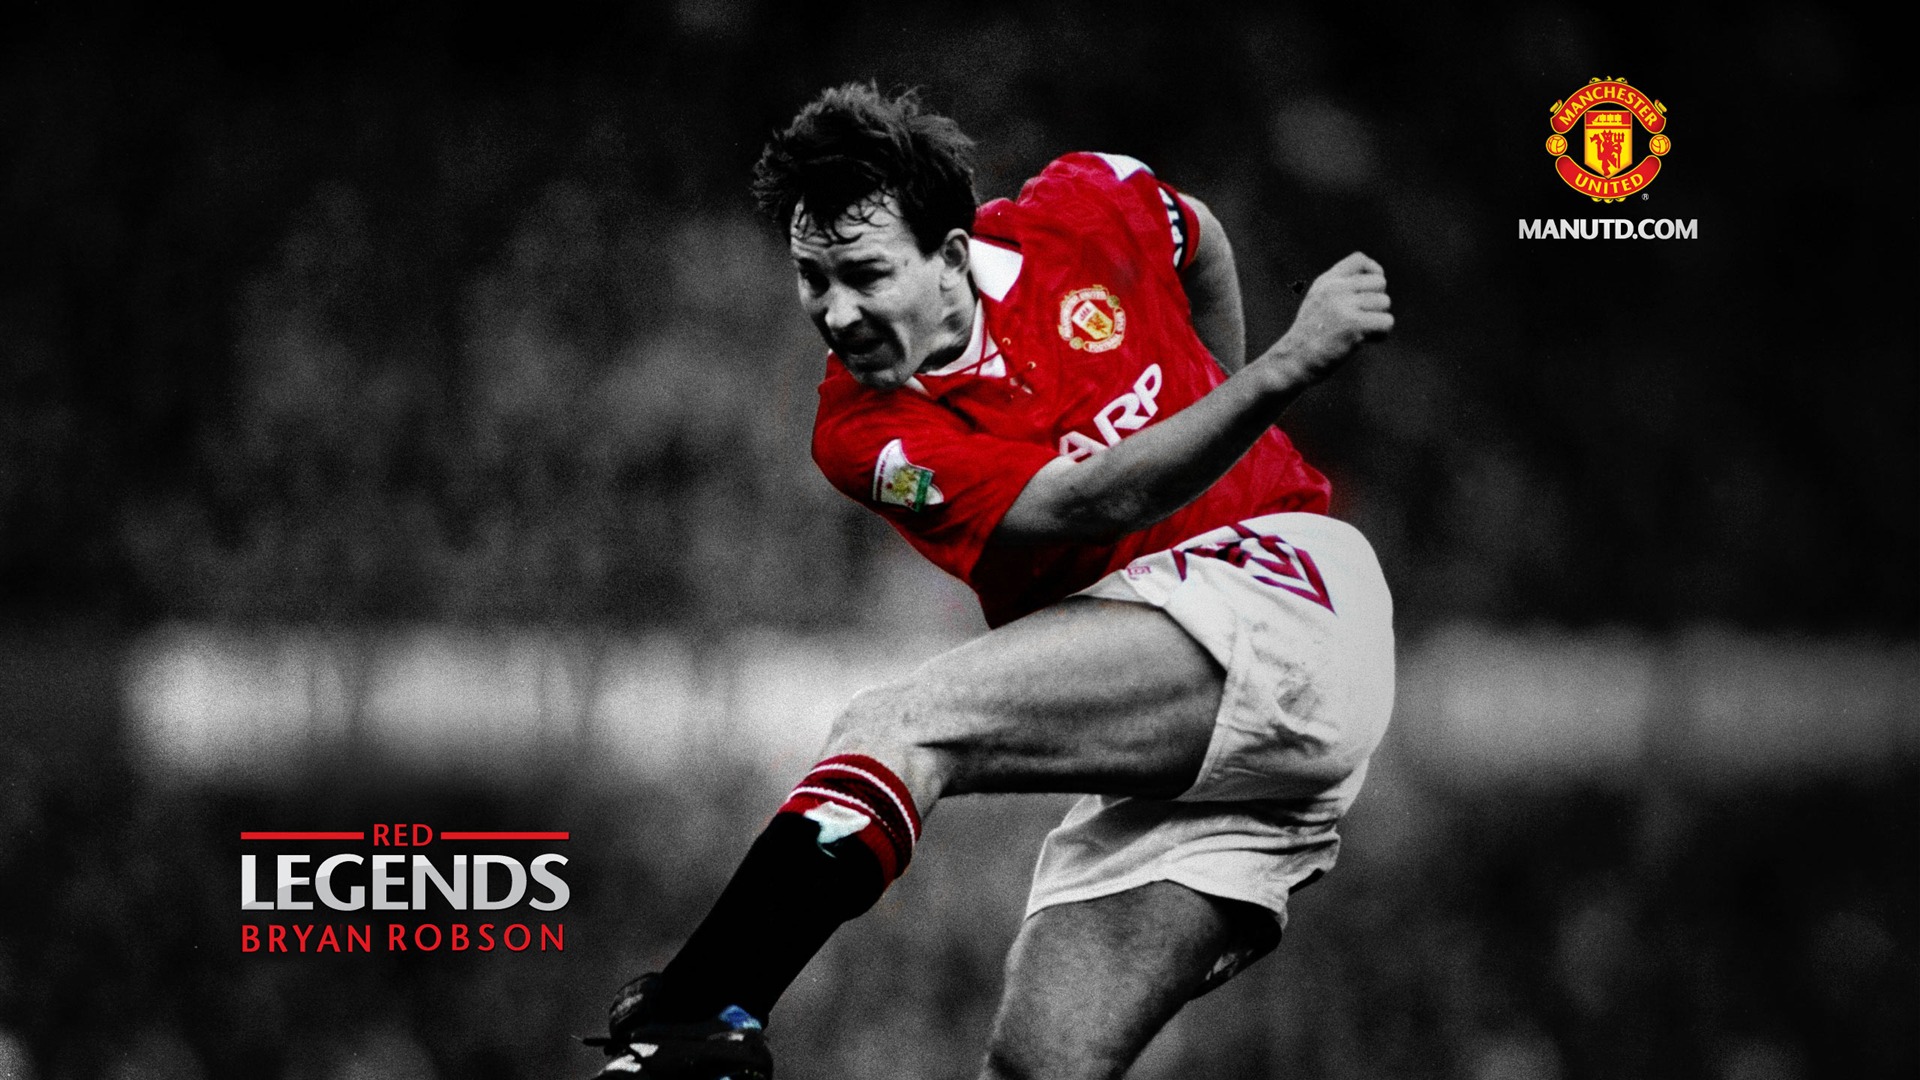 Bryan Robson Red Legends Manchester United Wallpaper